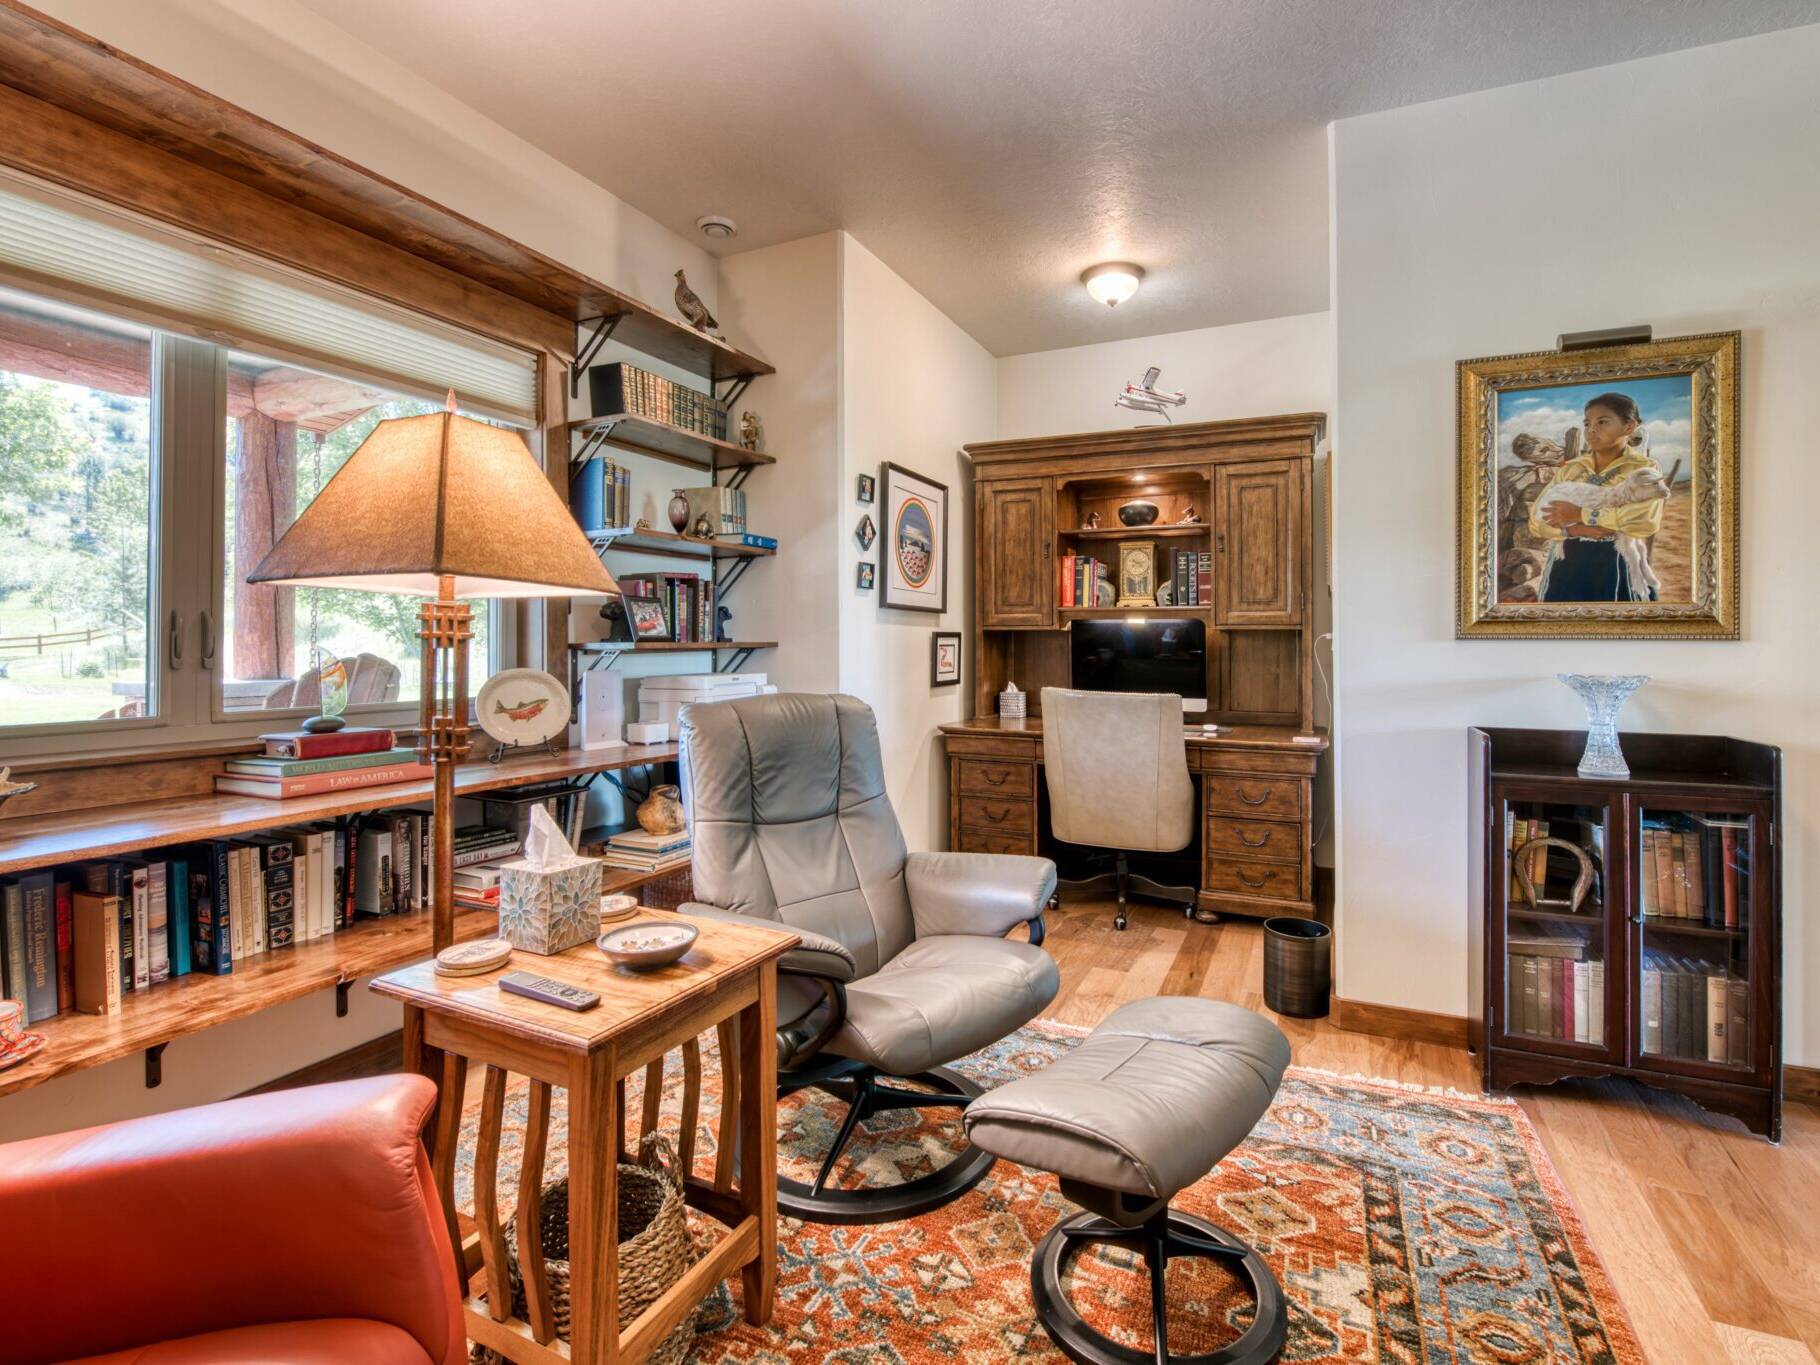 Home office with hardwood flooring, stained wood trim and doors in a custom home near Hamilton, MT